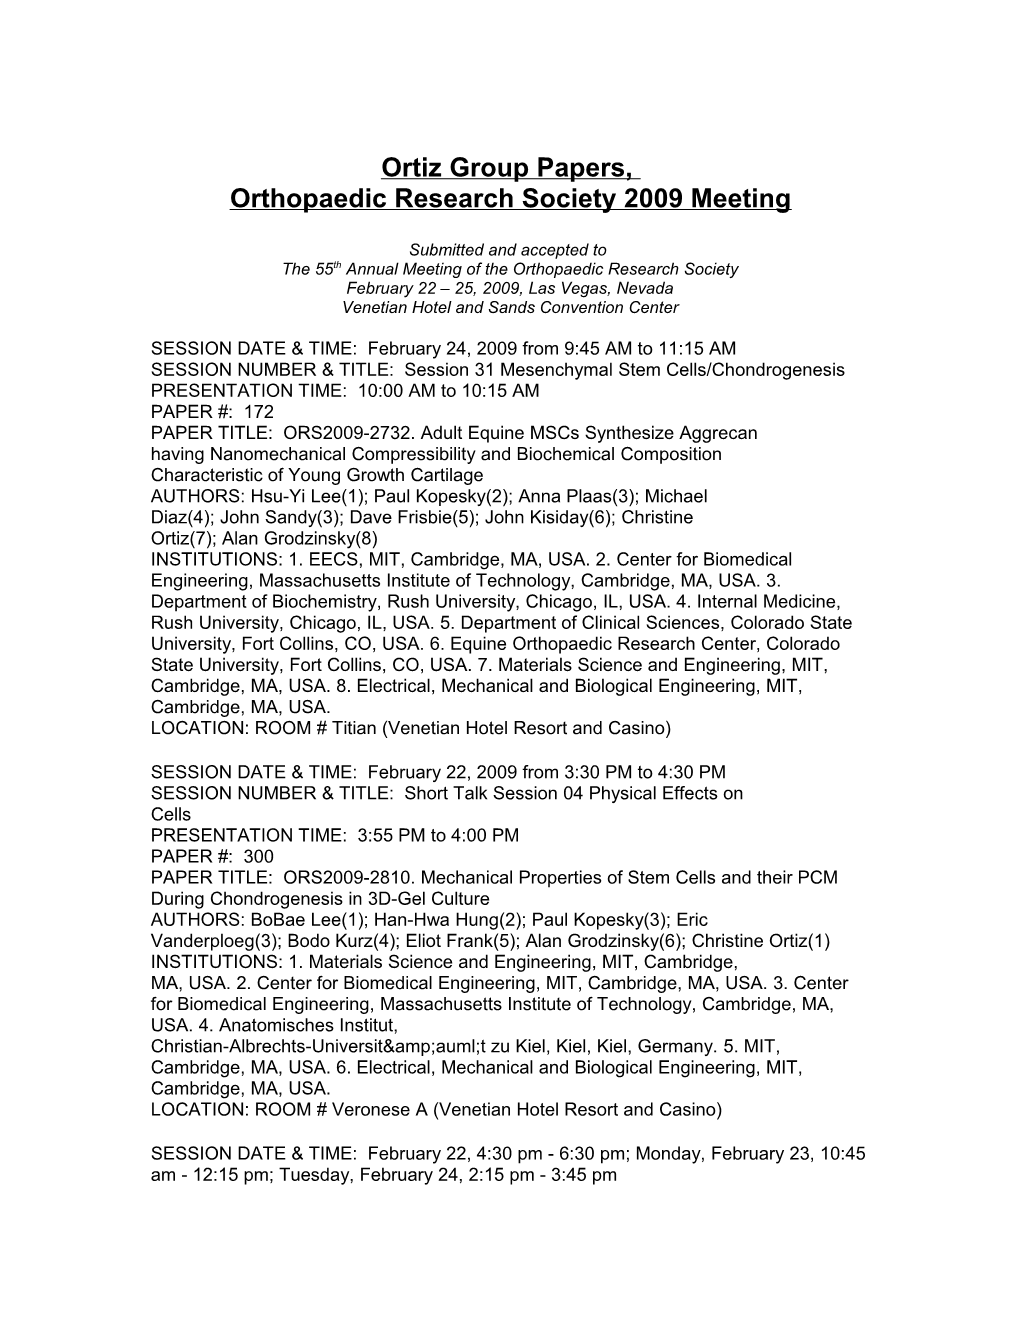 Ortiz Group Papers, Orthopaedic Research Society 2008 Meeting